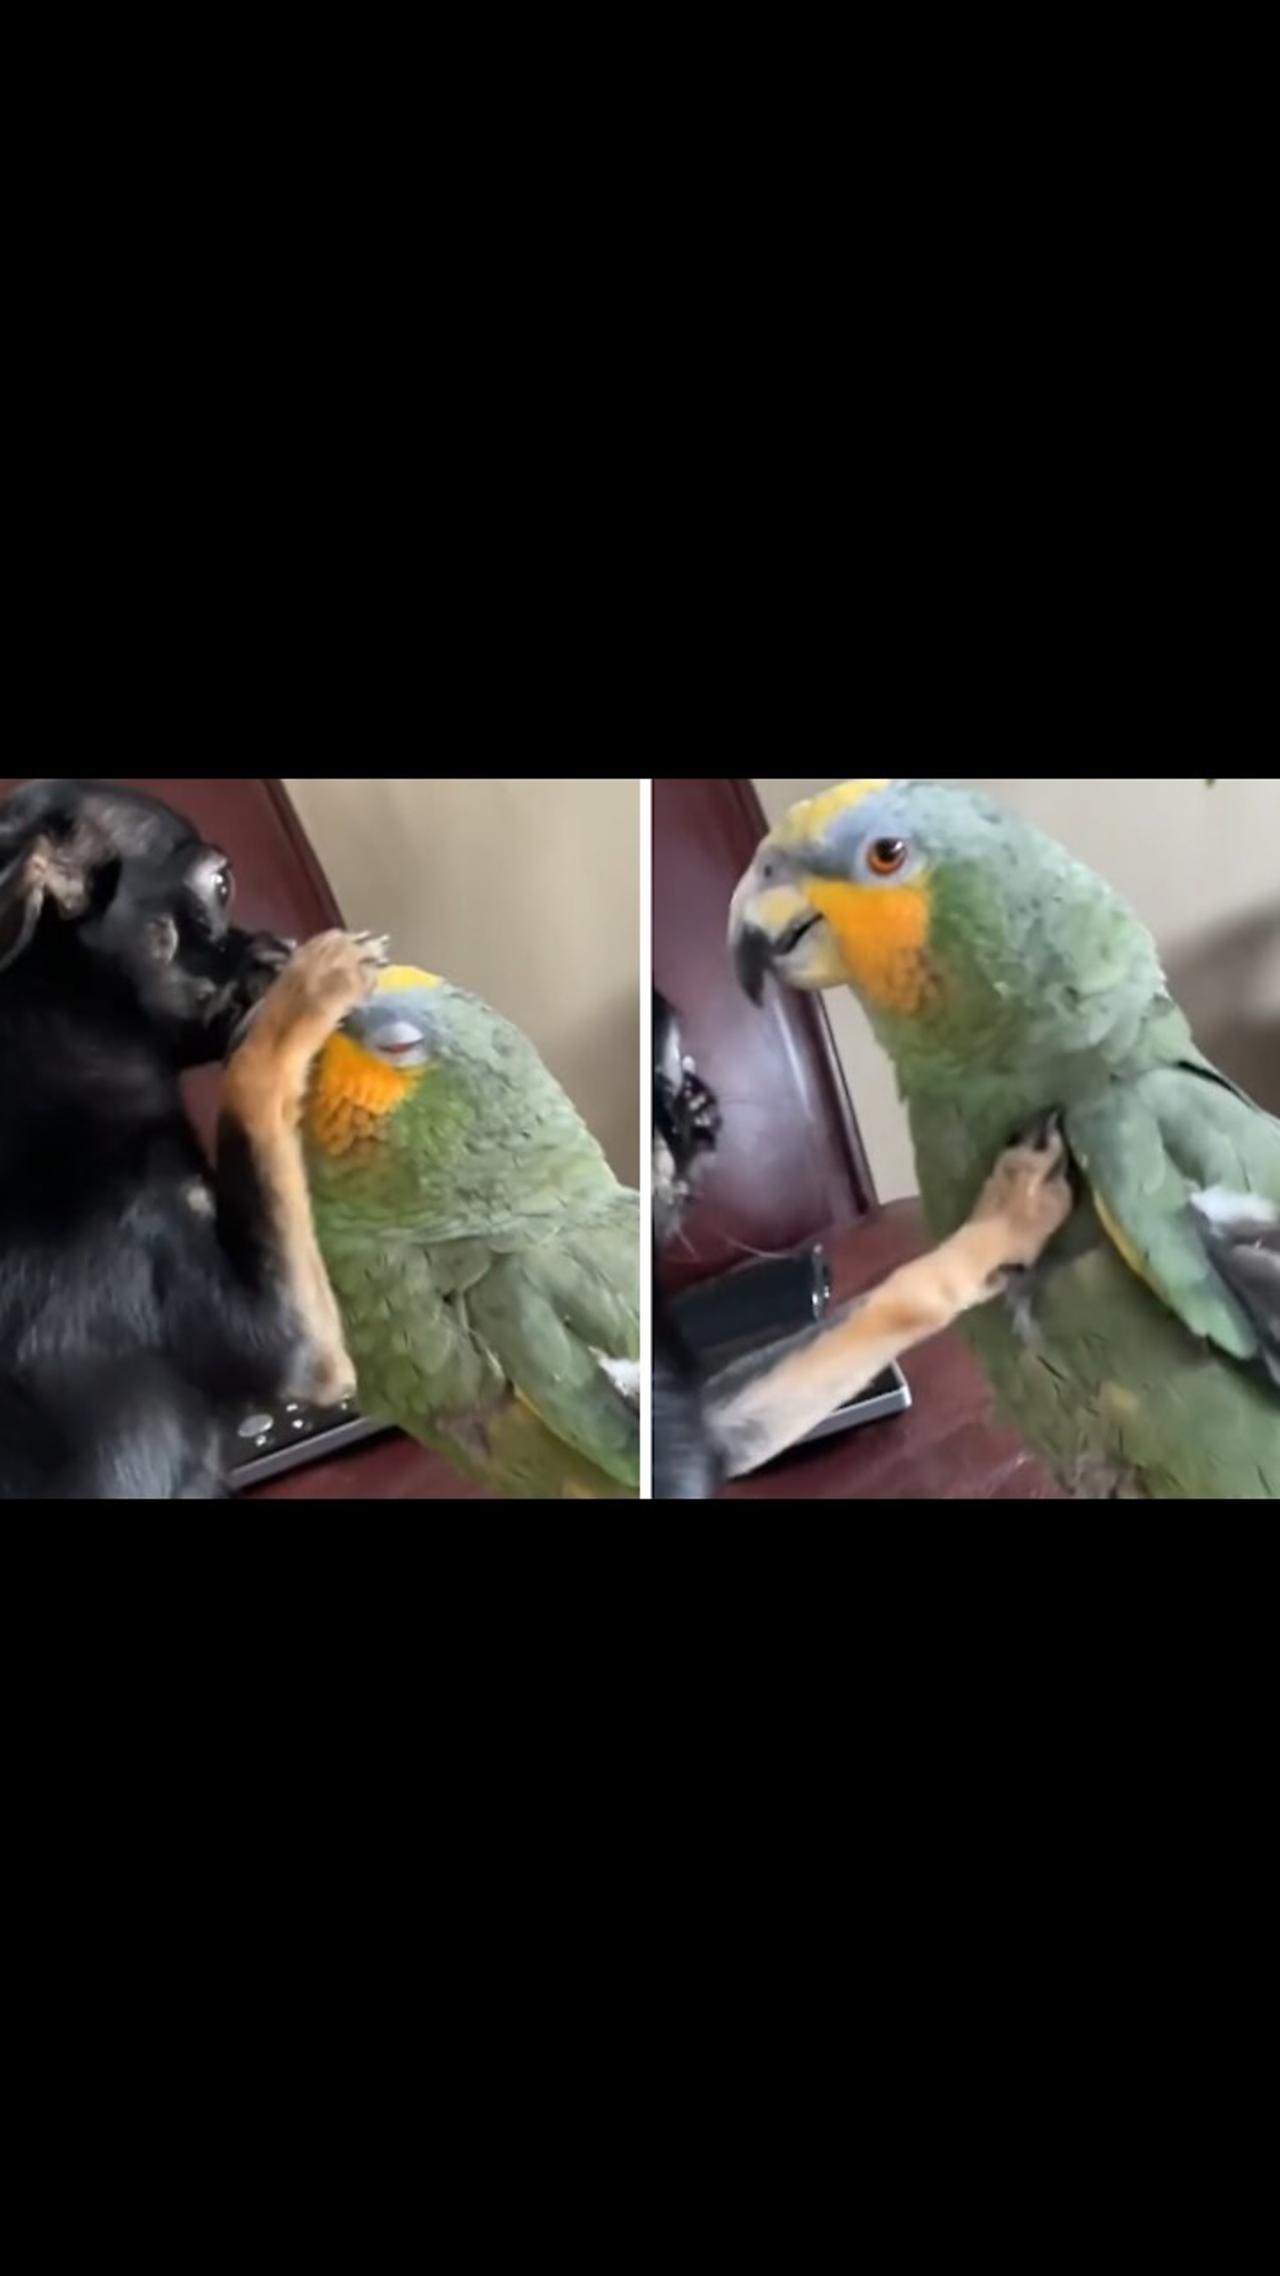 Parrot calls dog a 'good girl' for gently petting him